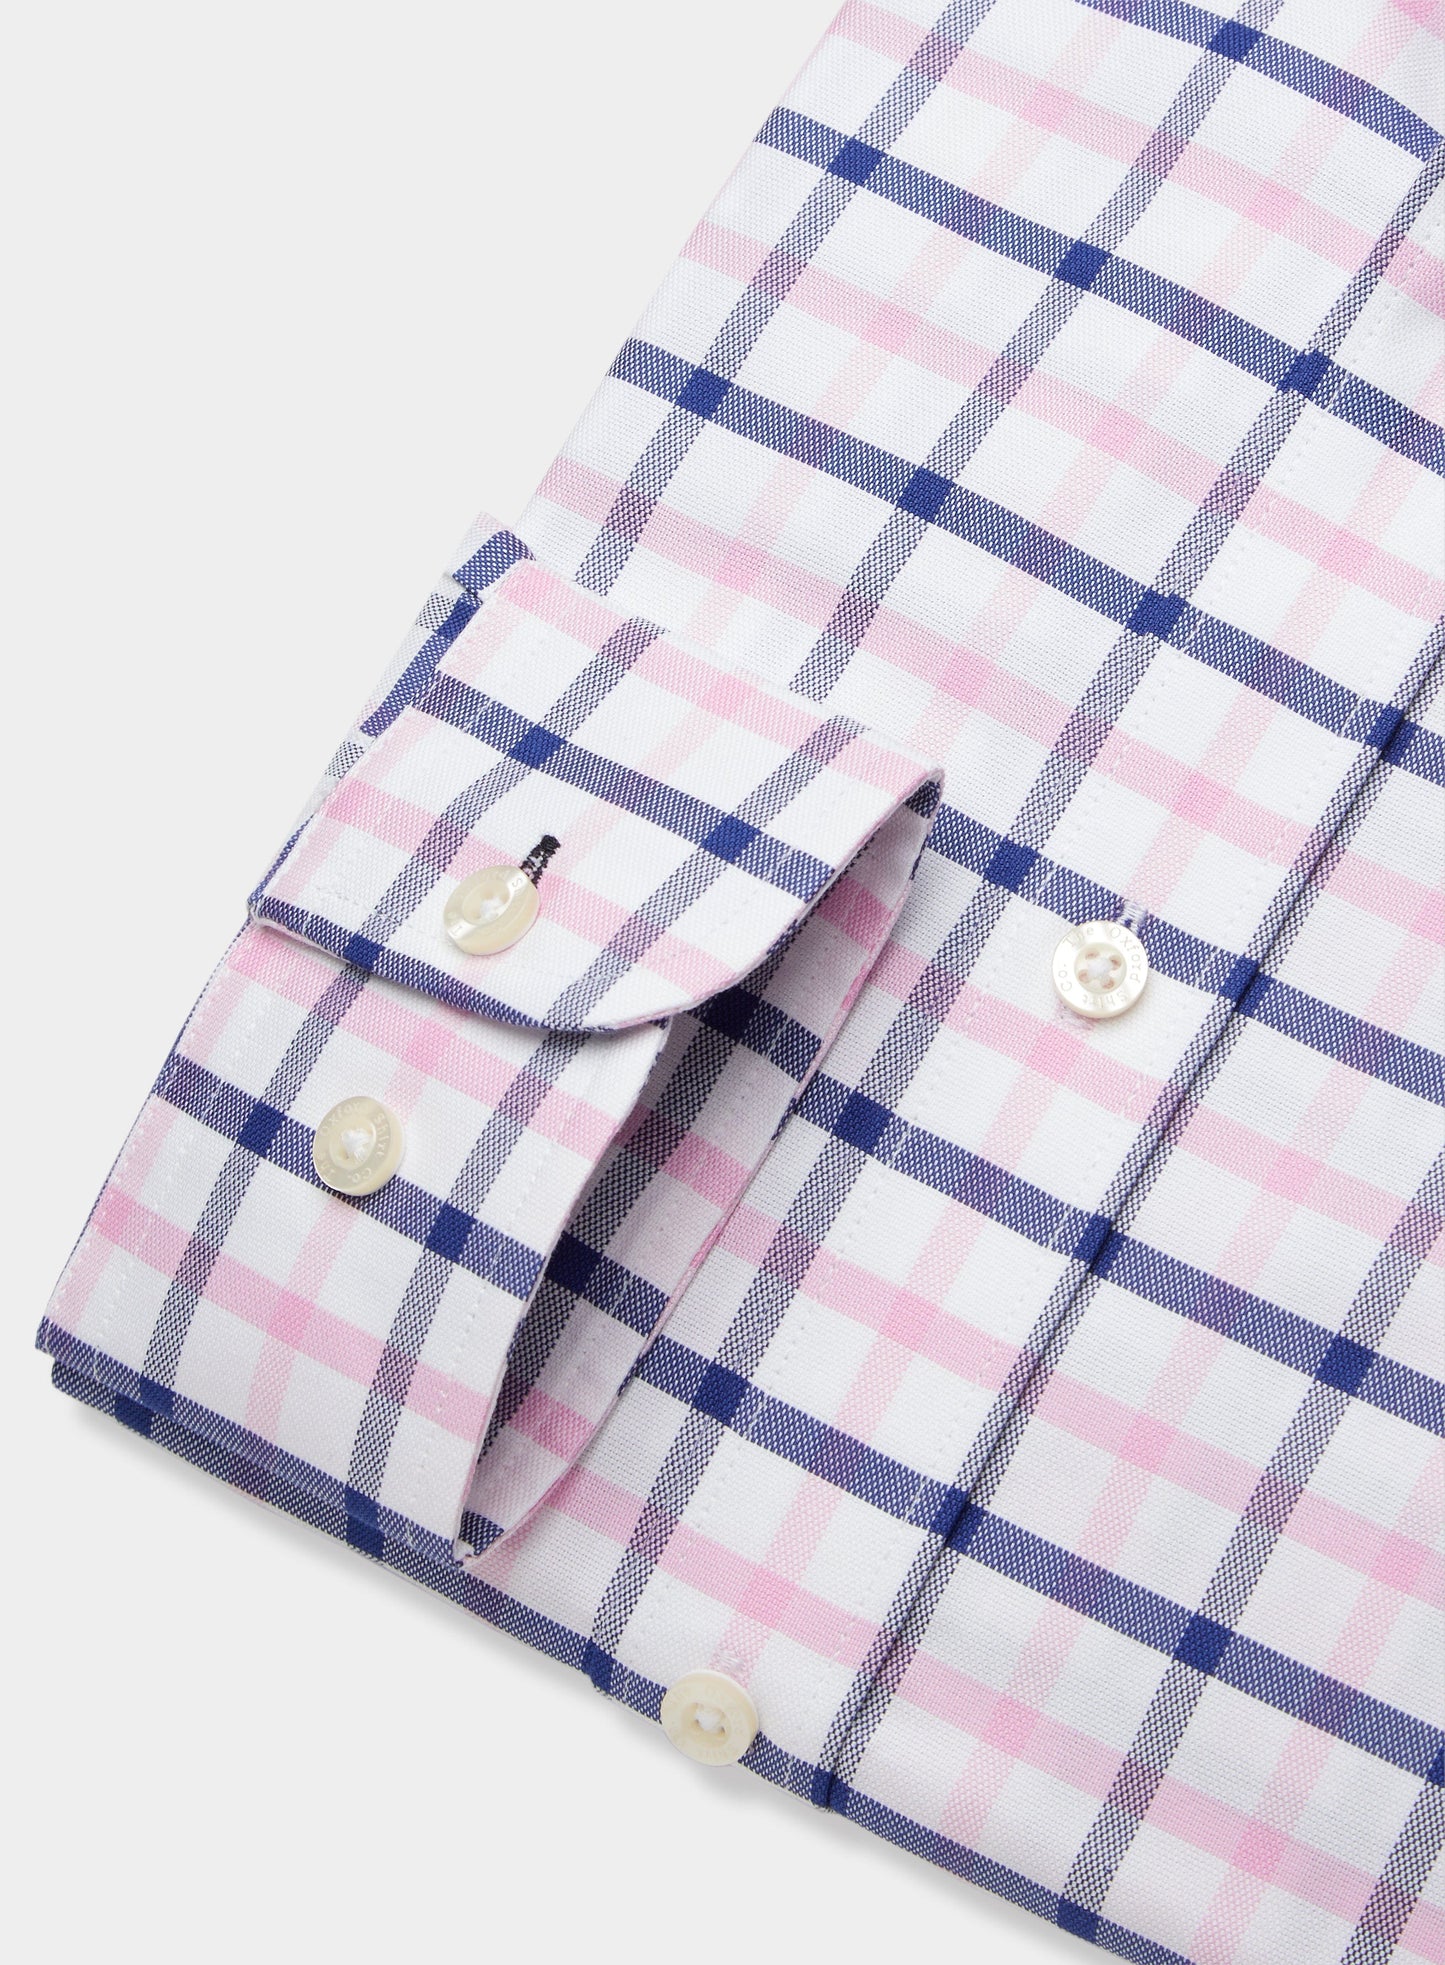 Classic Shirt in Navy and Pink Check